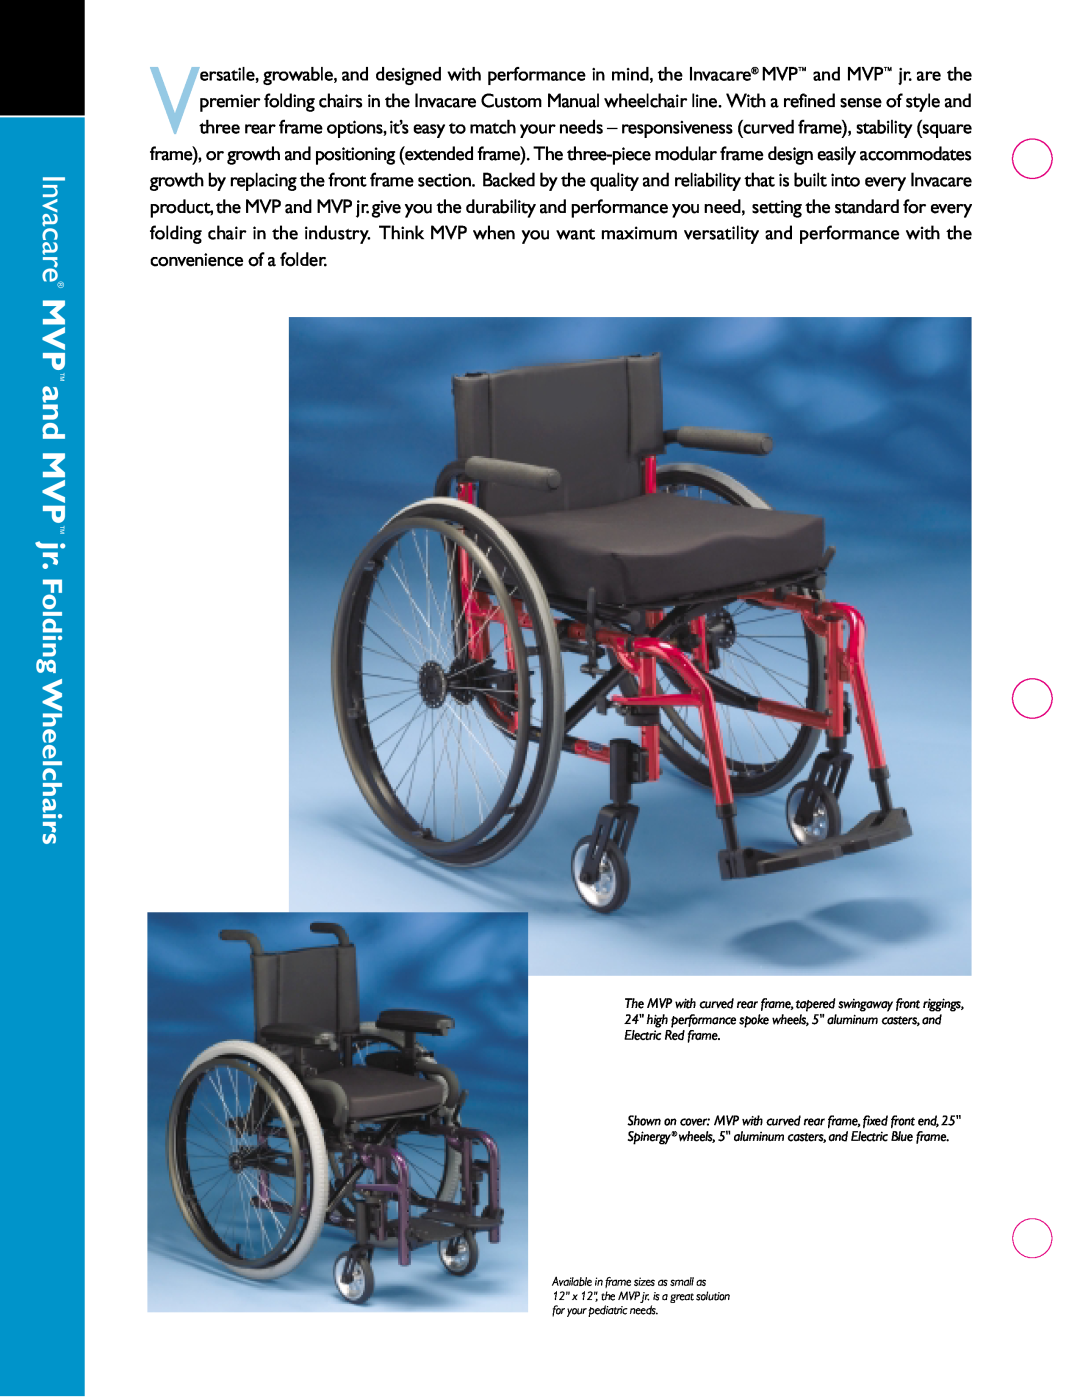 Invacare manual Invacare MVP and MVP jr. Folding Wheelchairs, convenience of a folder 